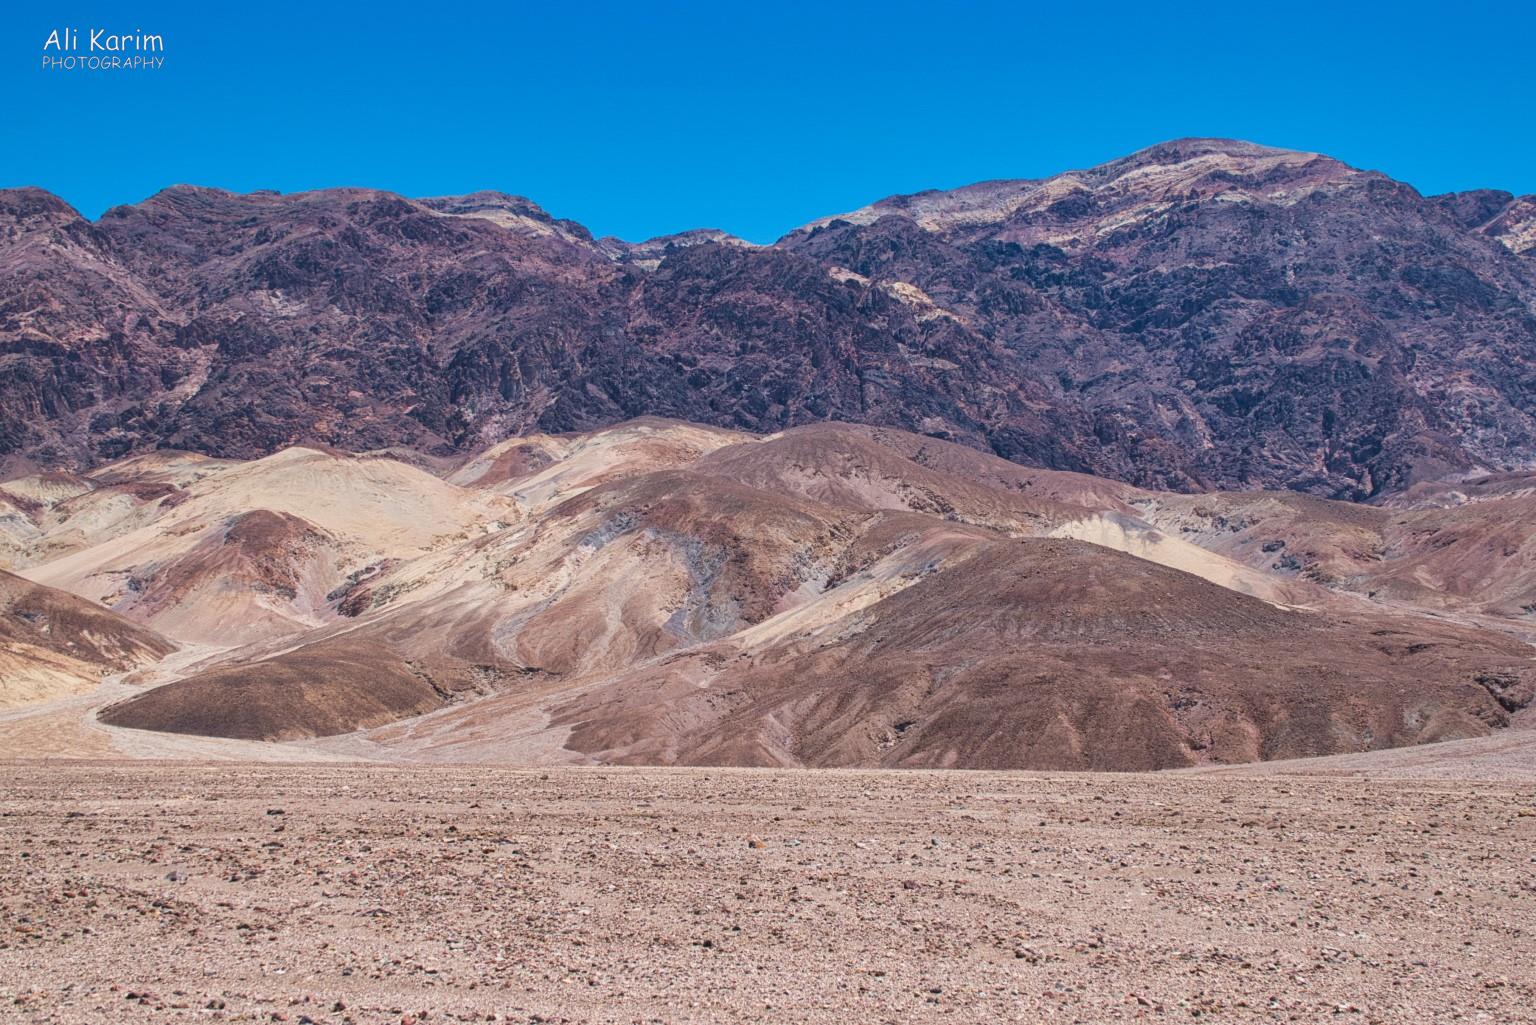 Death Valley National Park, June 2020, View of Dante’s peak, towering 5,575 ft (1,699 m) above Badwater Basin, on the ridge of the Black Mountains